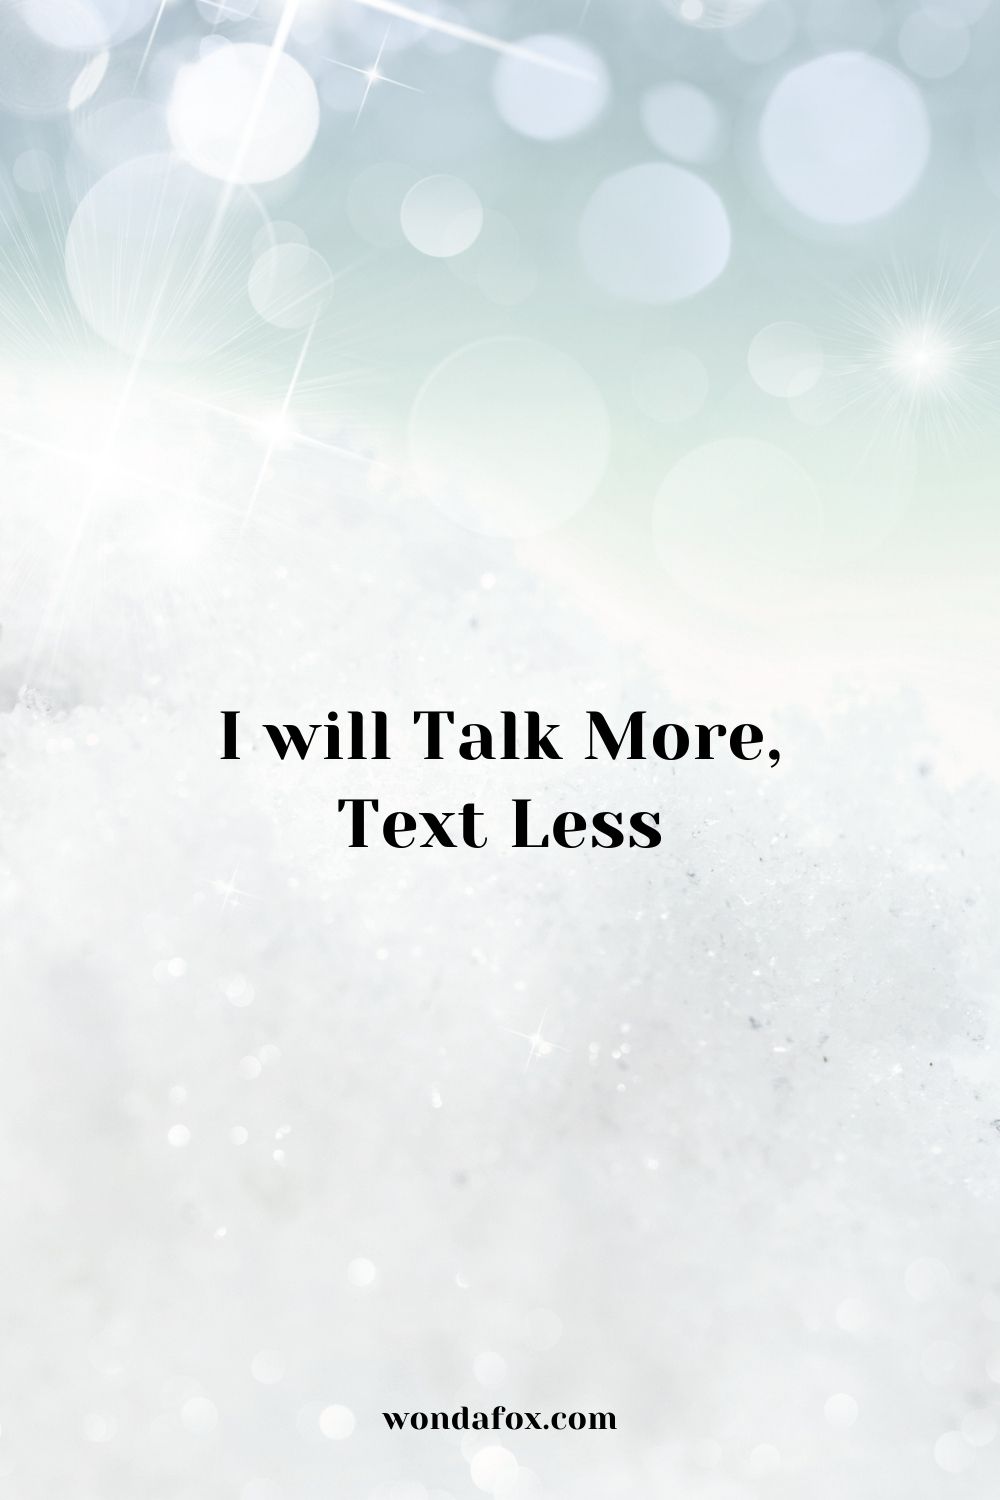 I will talk more, text less